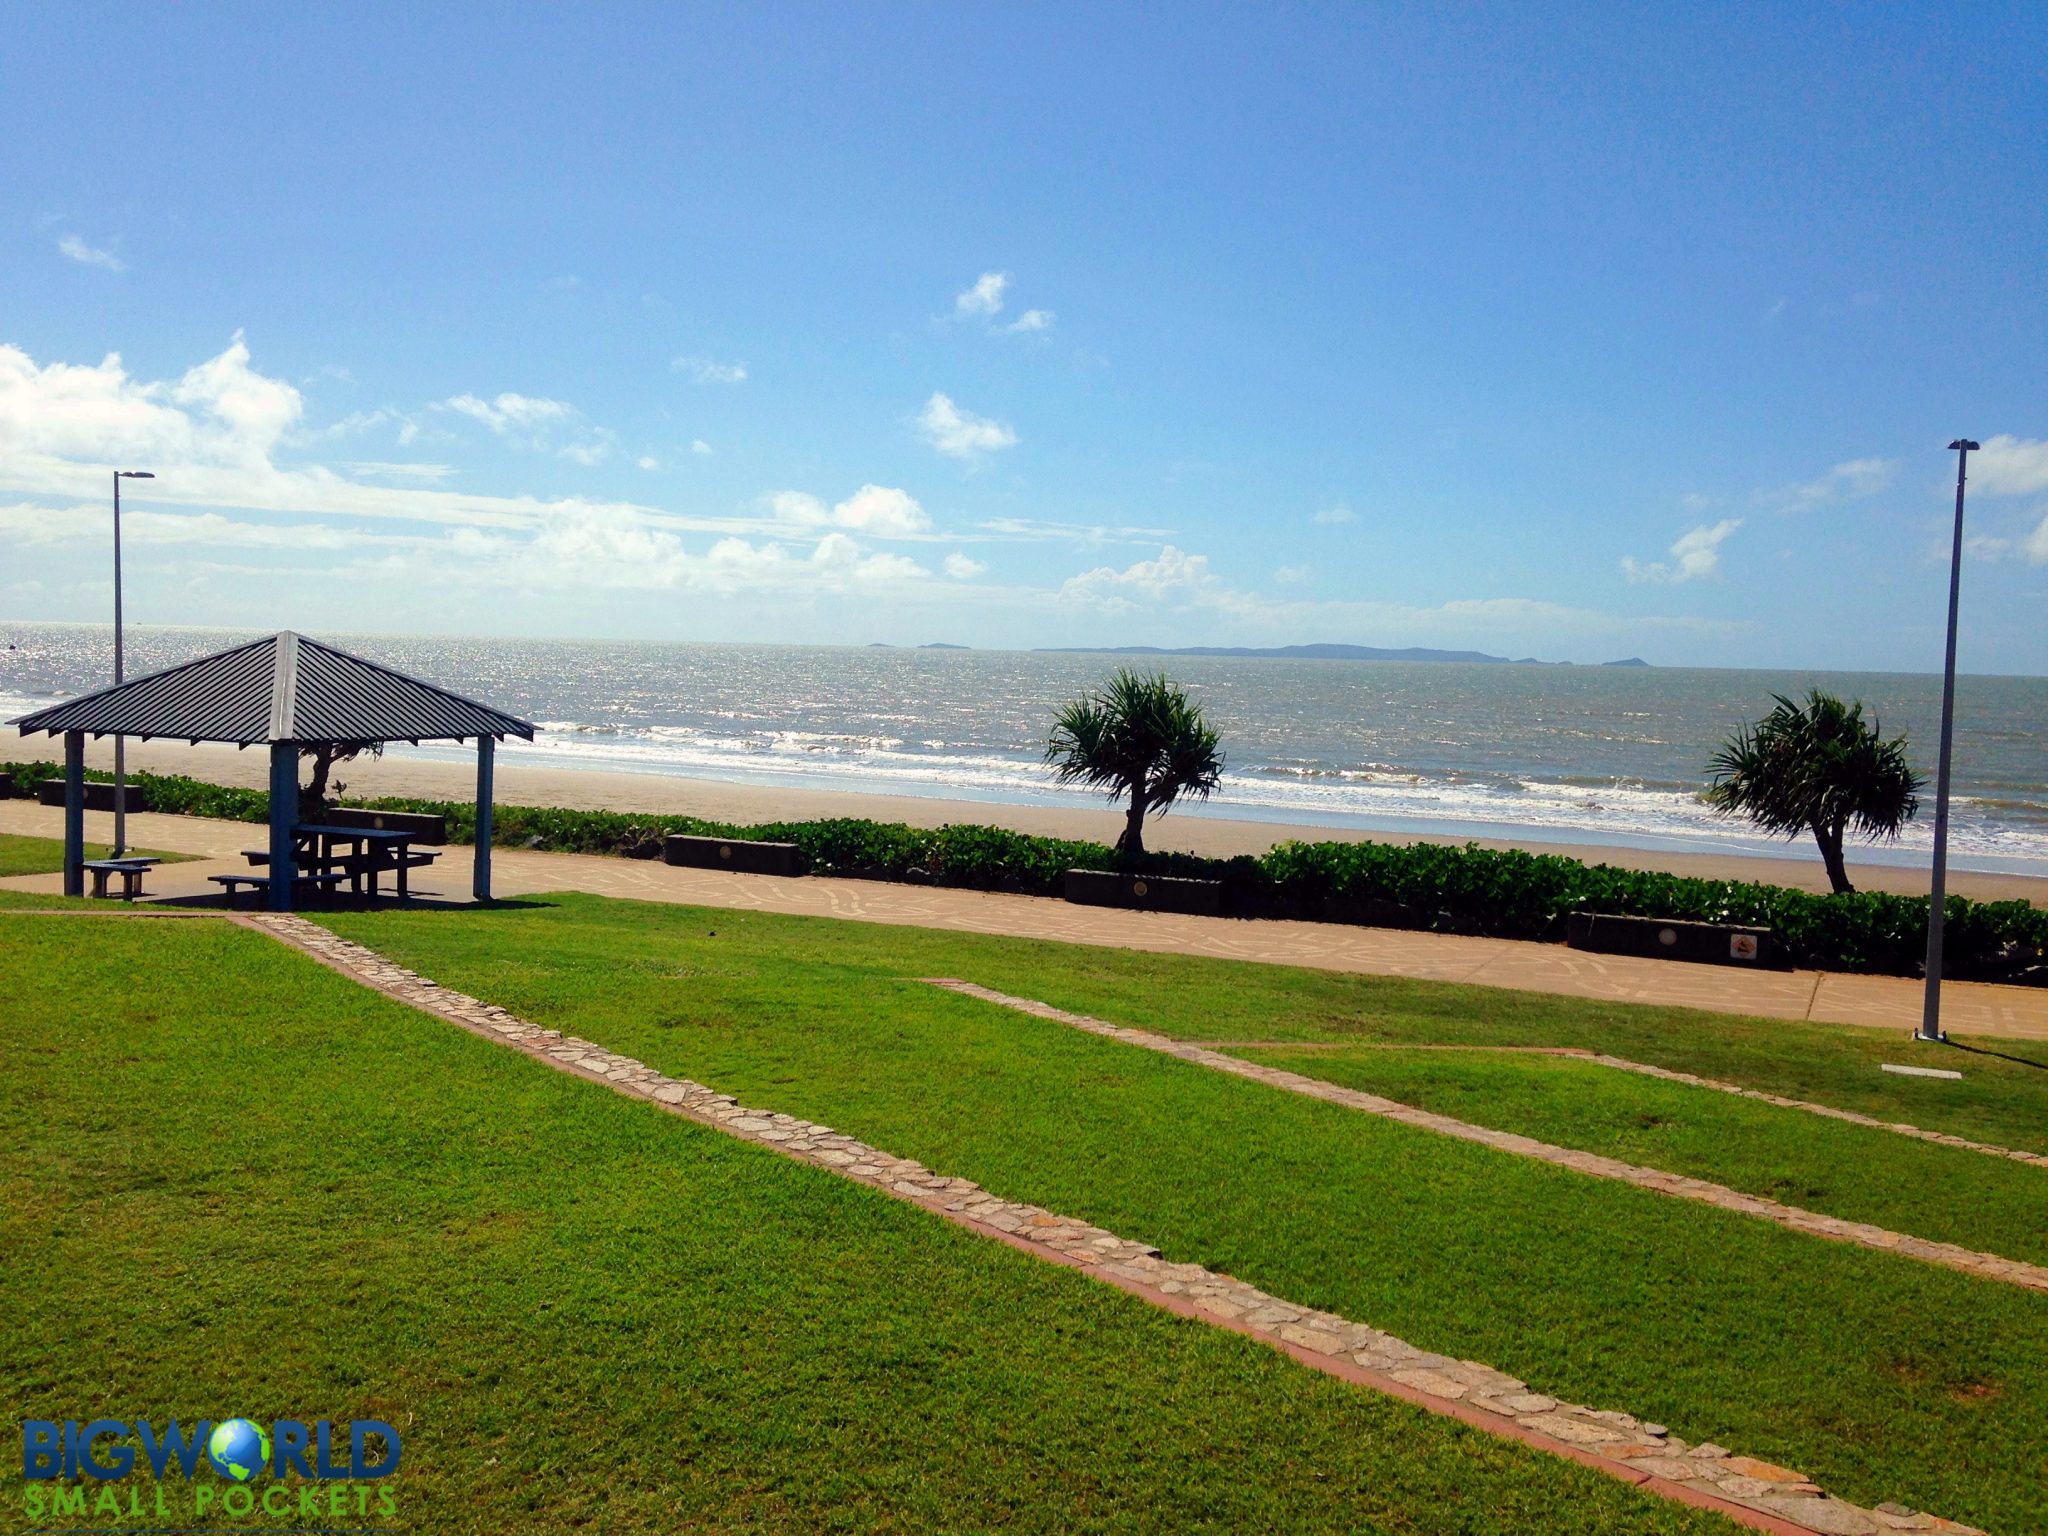 10 Best FREE Things to Do in Yeppoon, Queensland - Big World Small Pockets